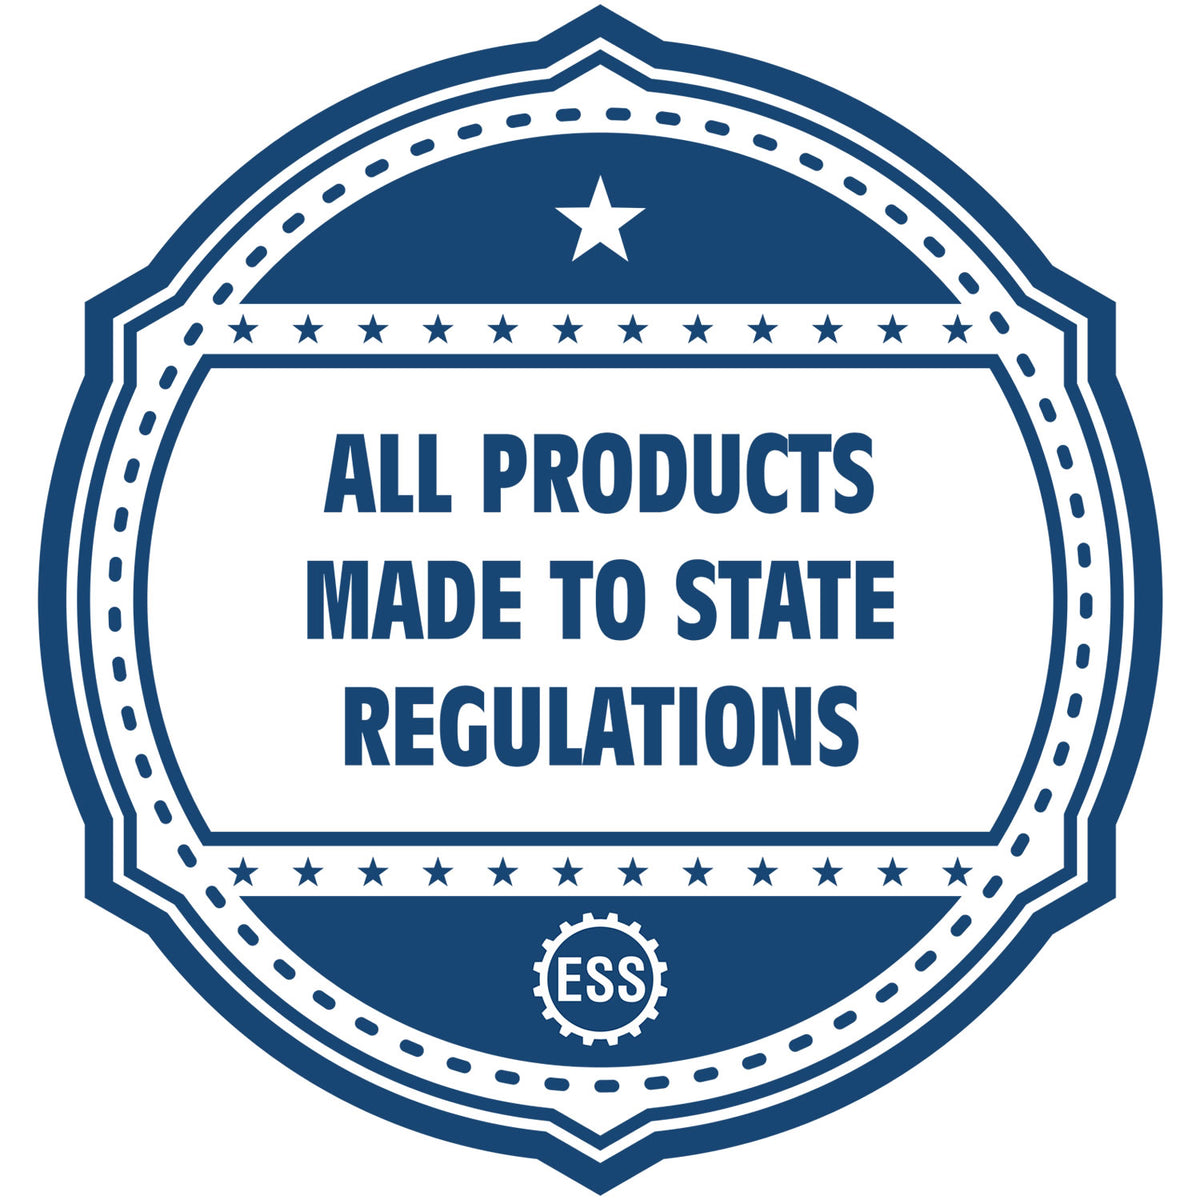 An icon or badge element for the Self-Inking Florida Landscape Architect Stamp showing that this product is made in compliance with state regulations.